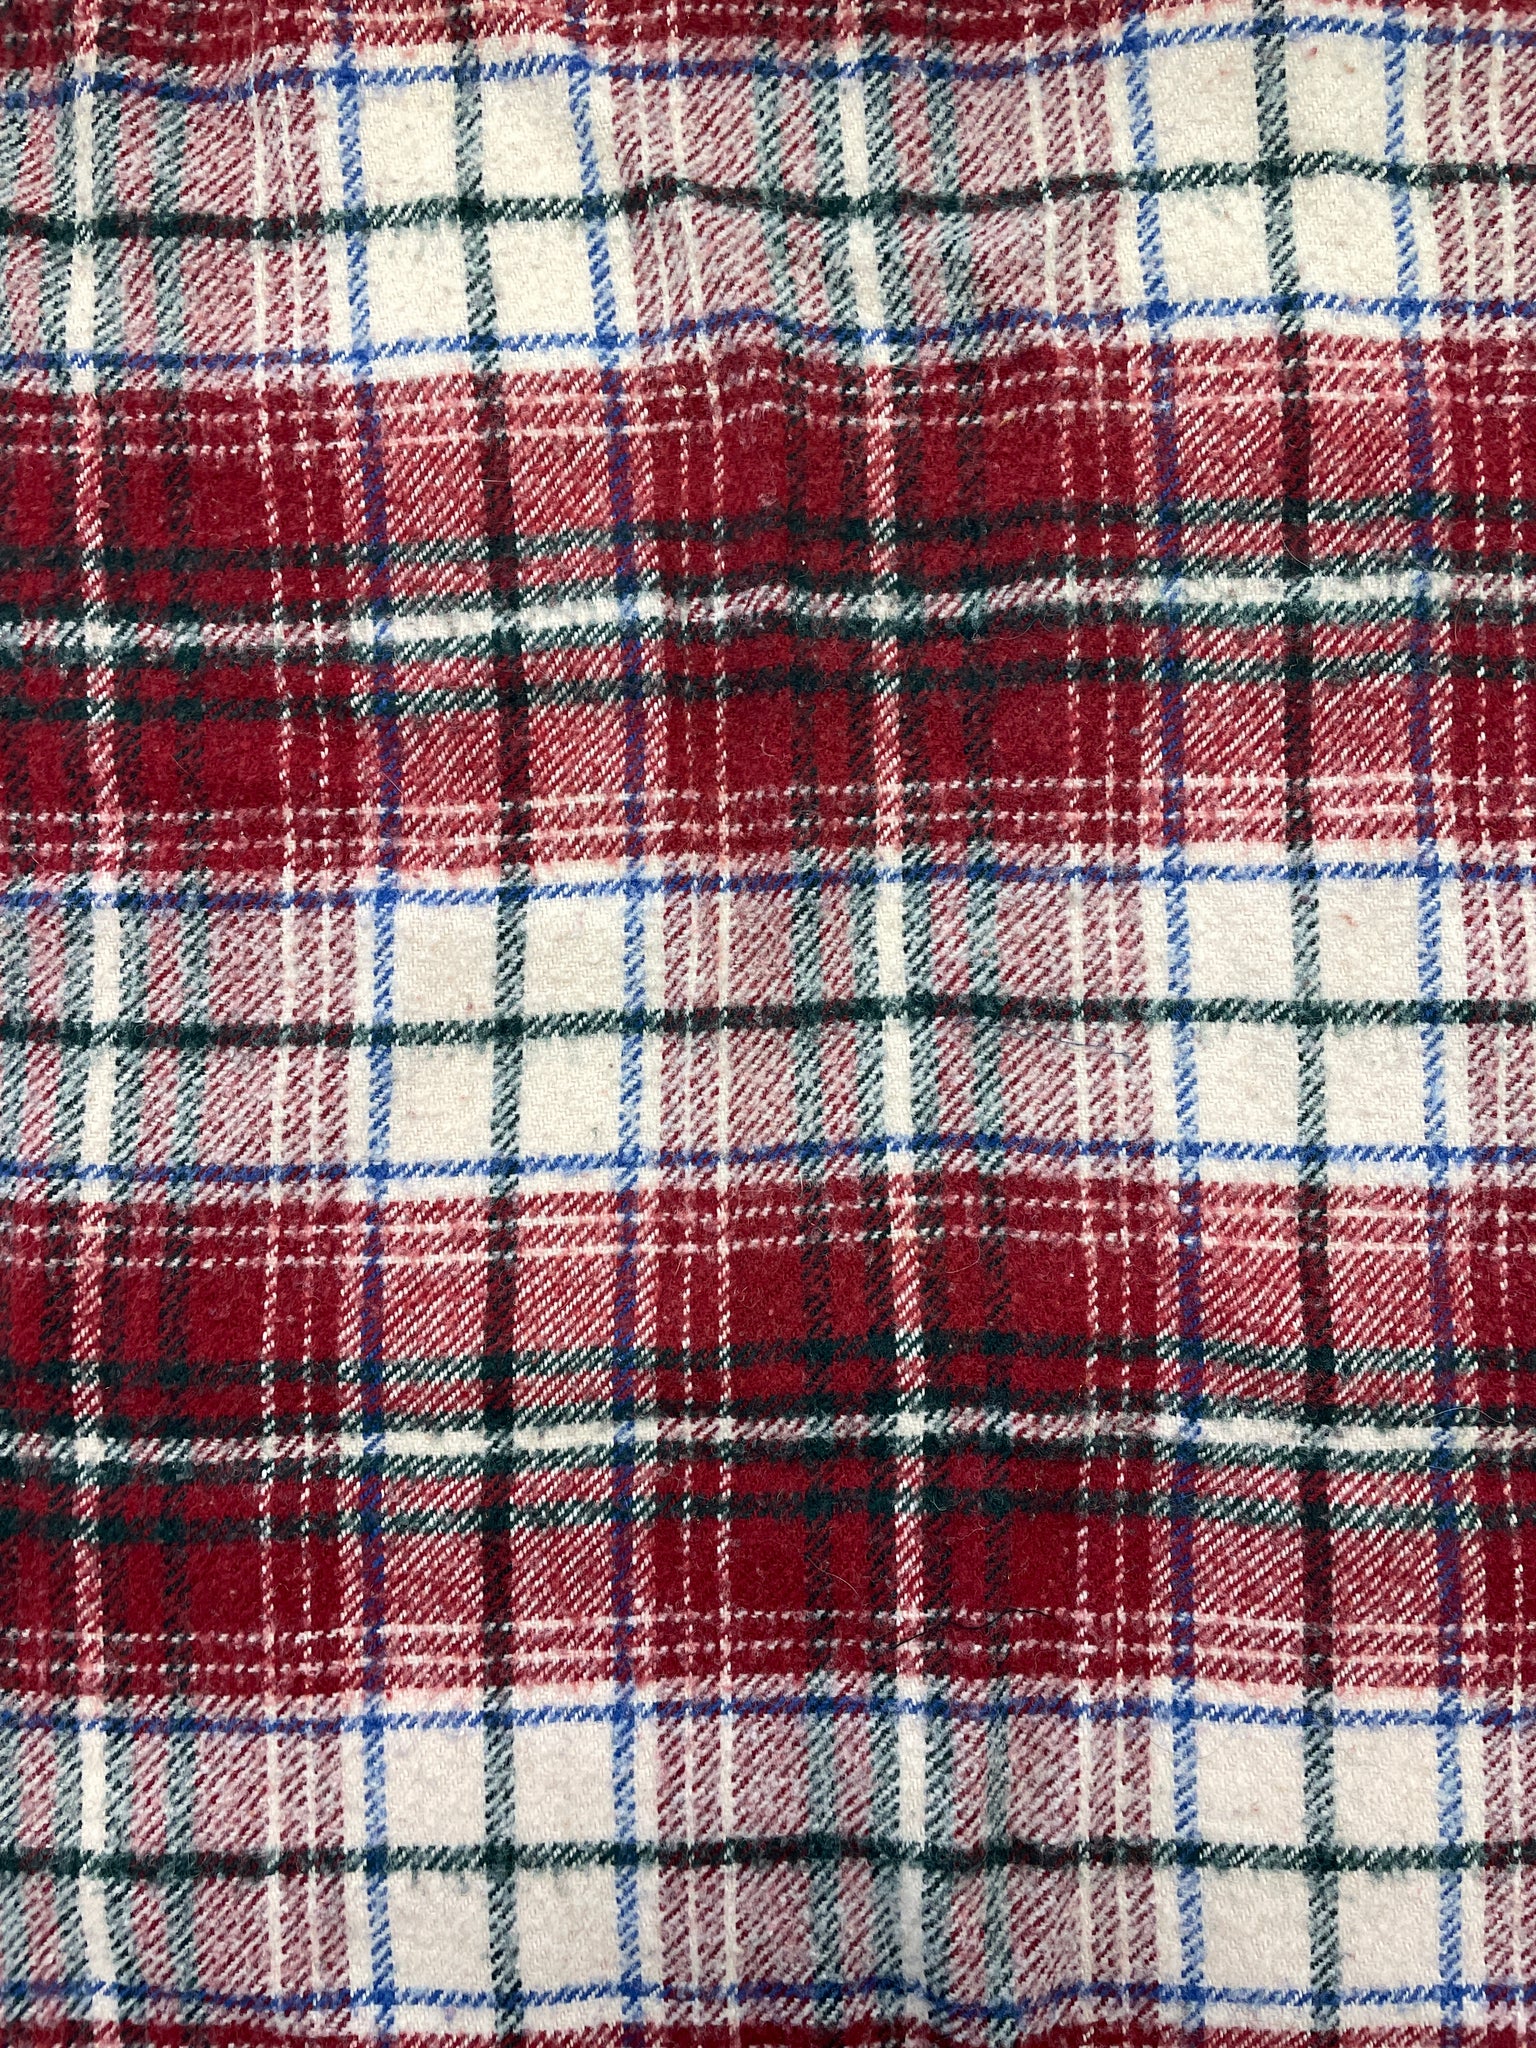 2 YD Wool Plaid Blanket Vintage Salvaged - Red, Off White, Green and Blue